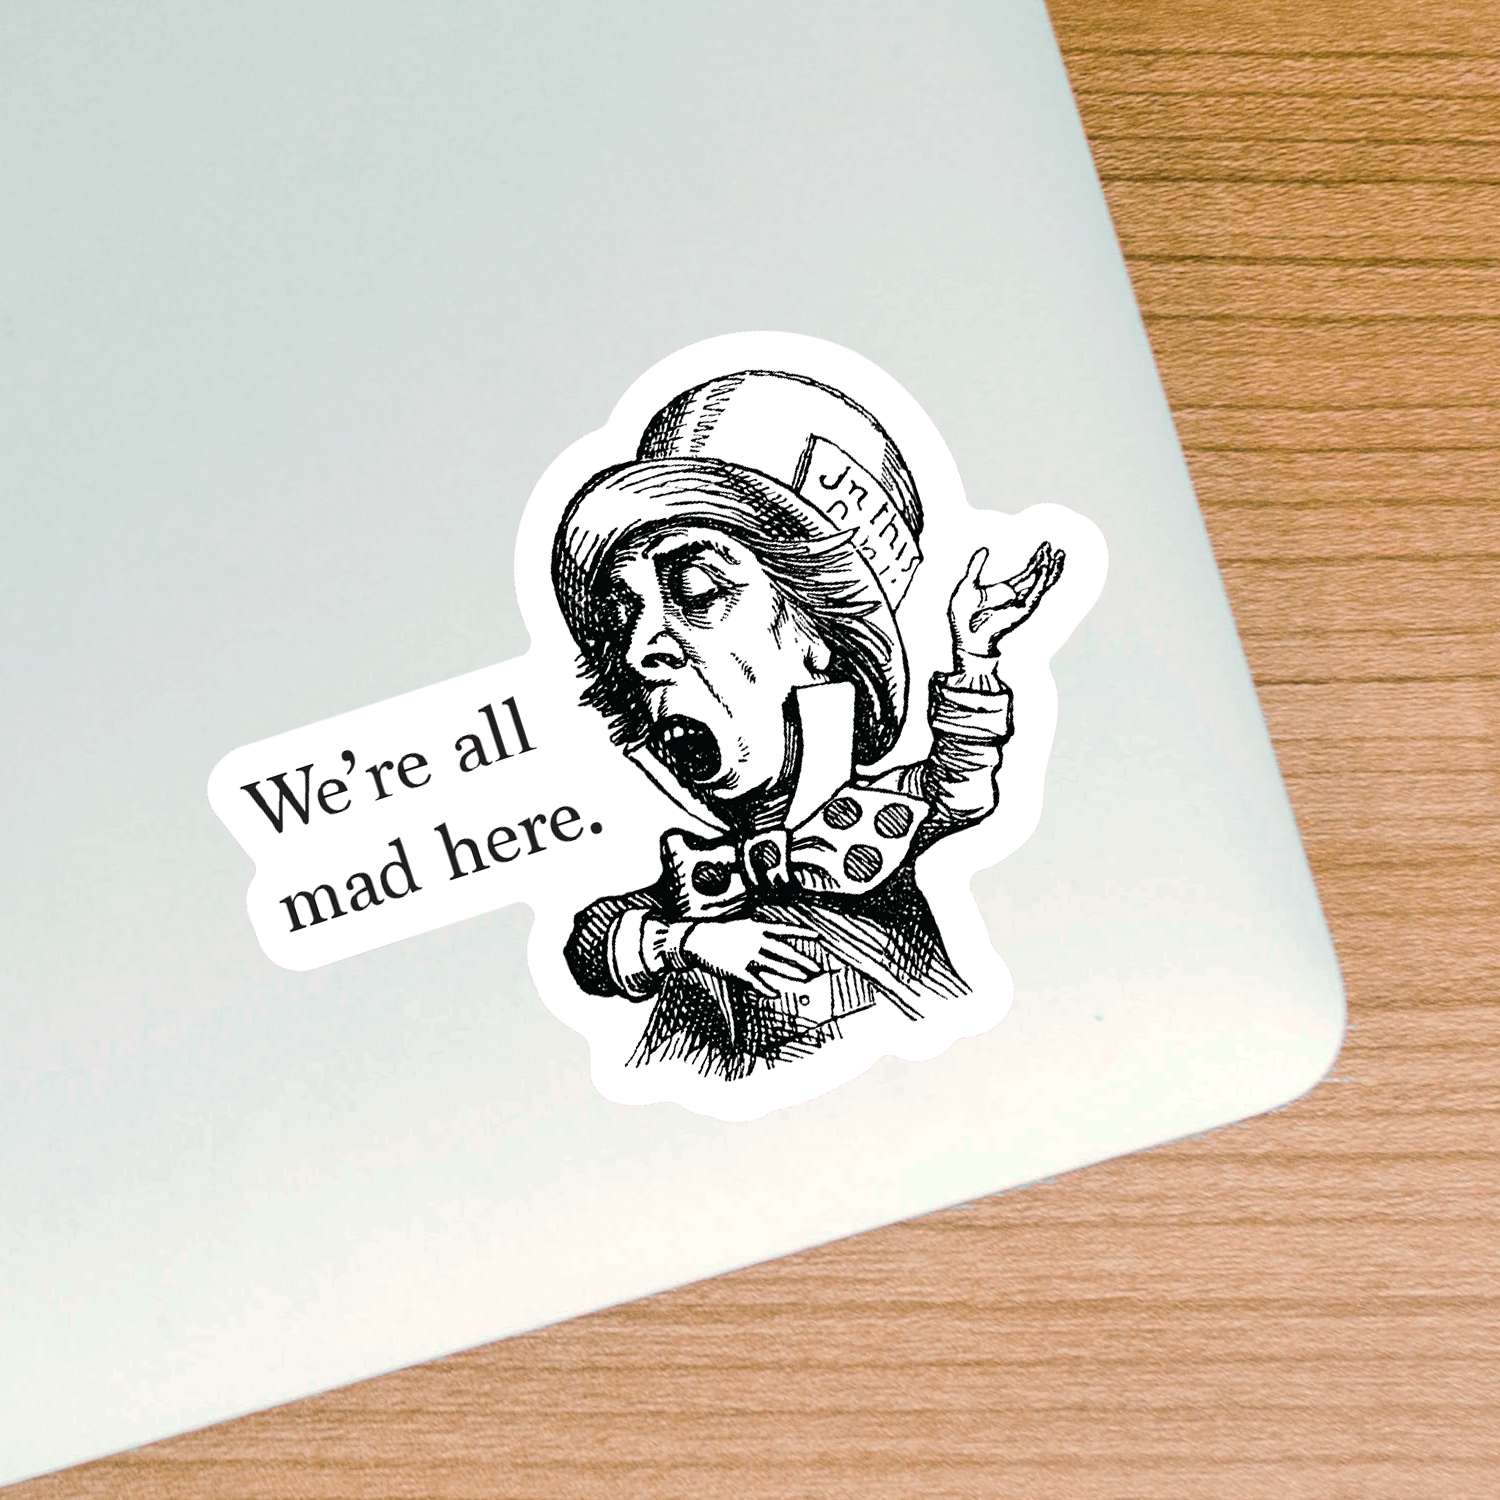 We're All Mad Here Sticker